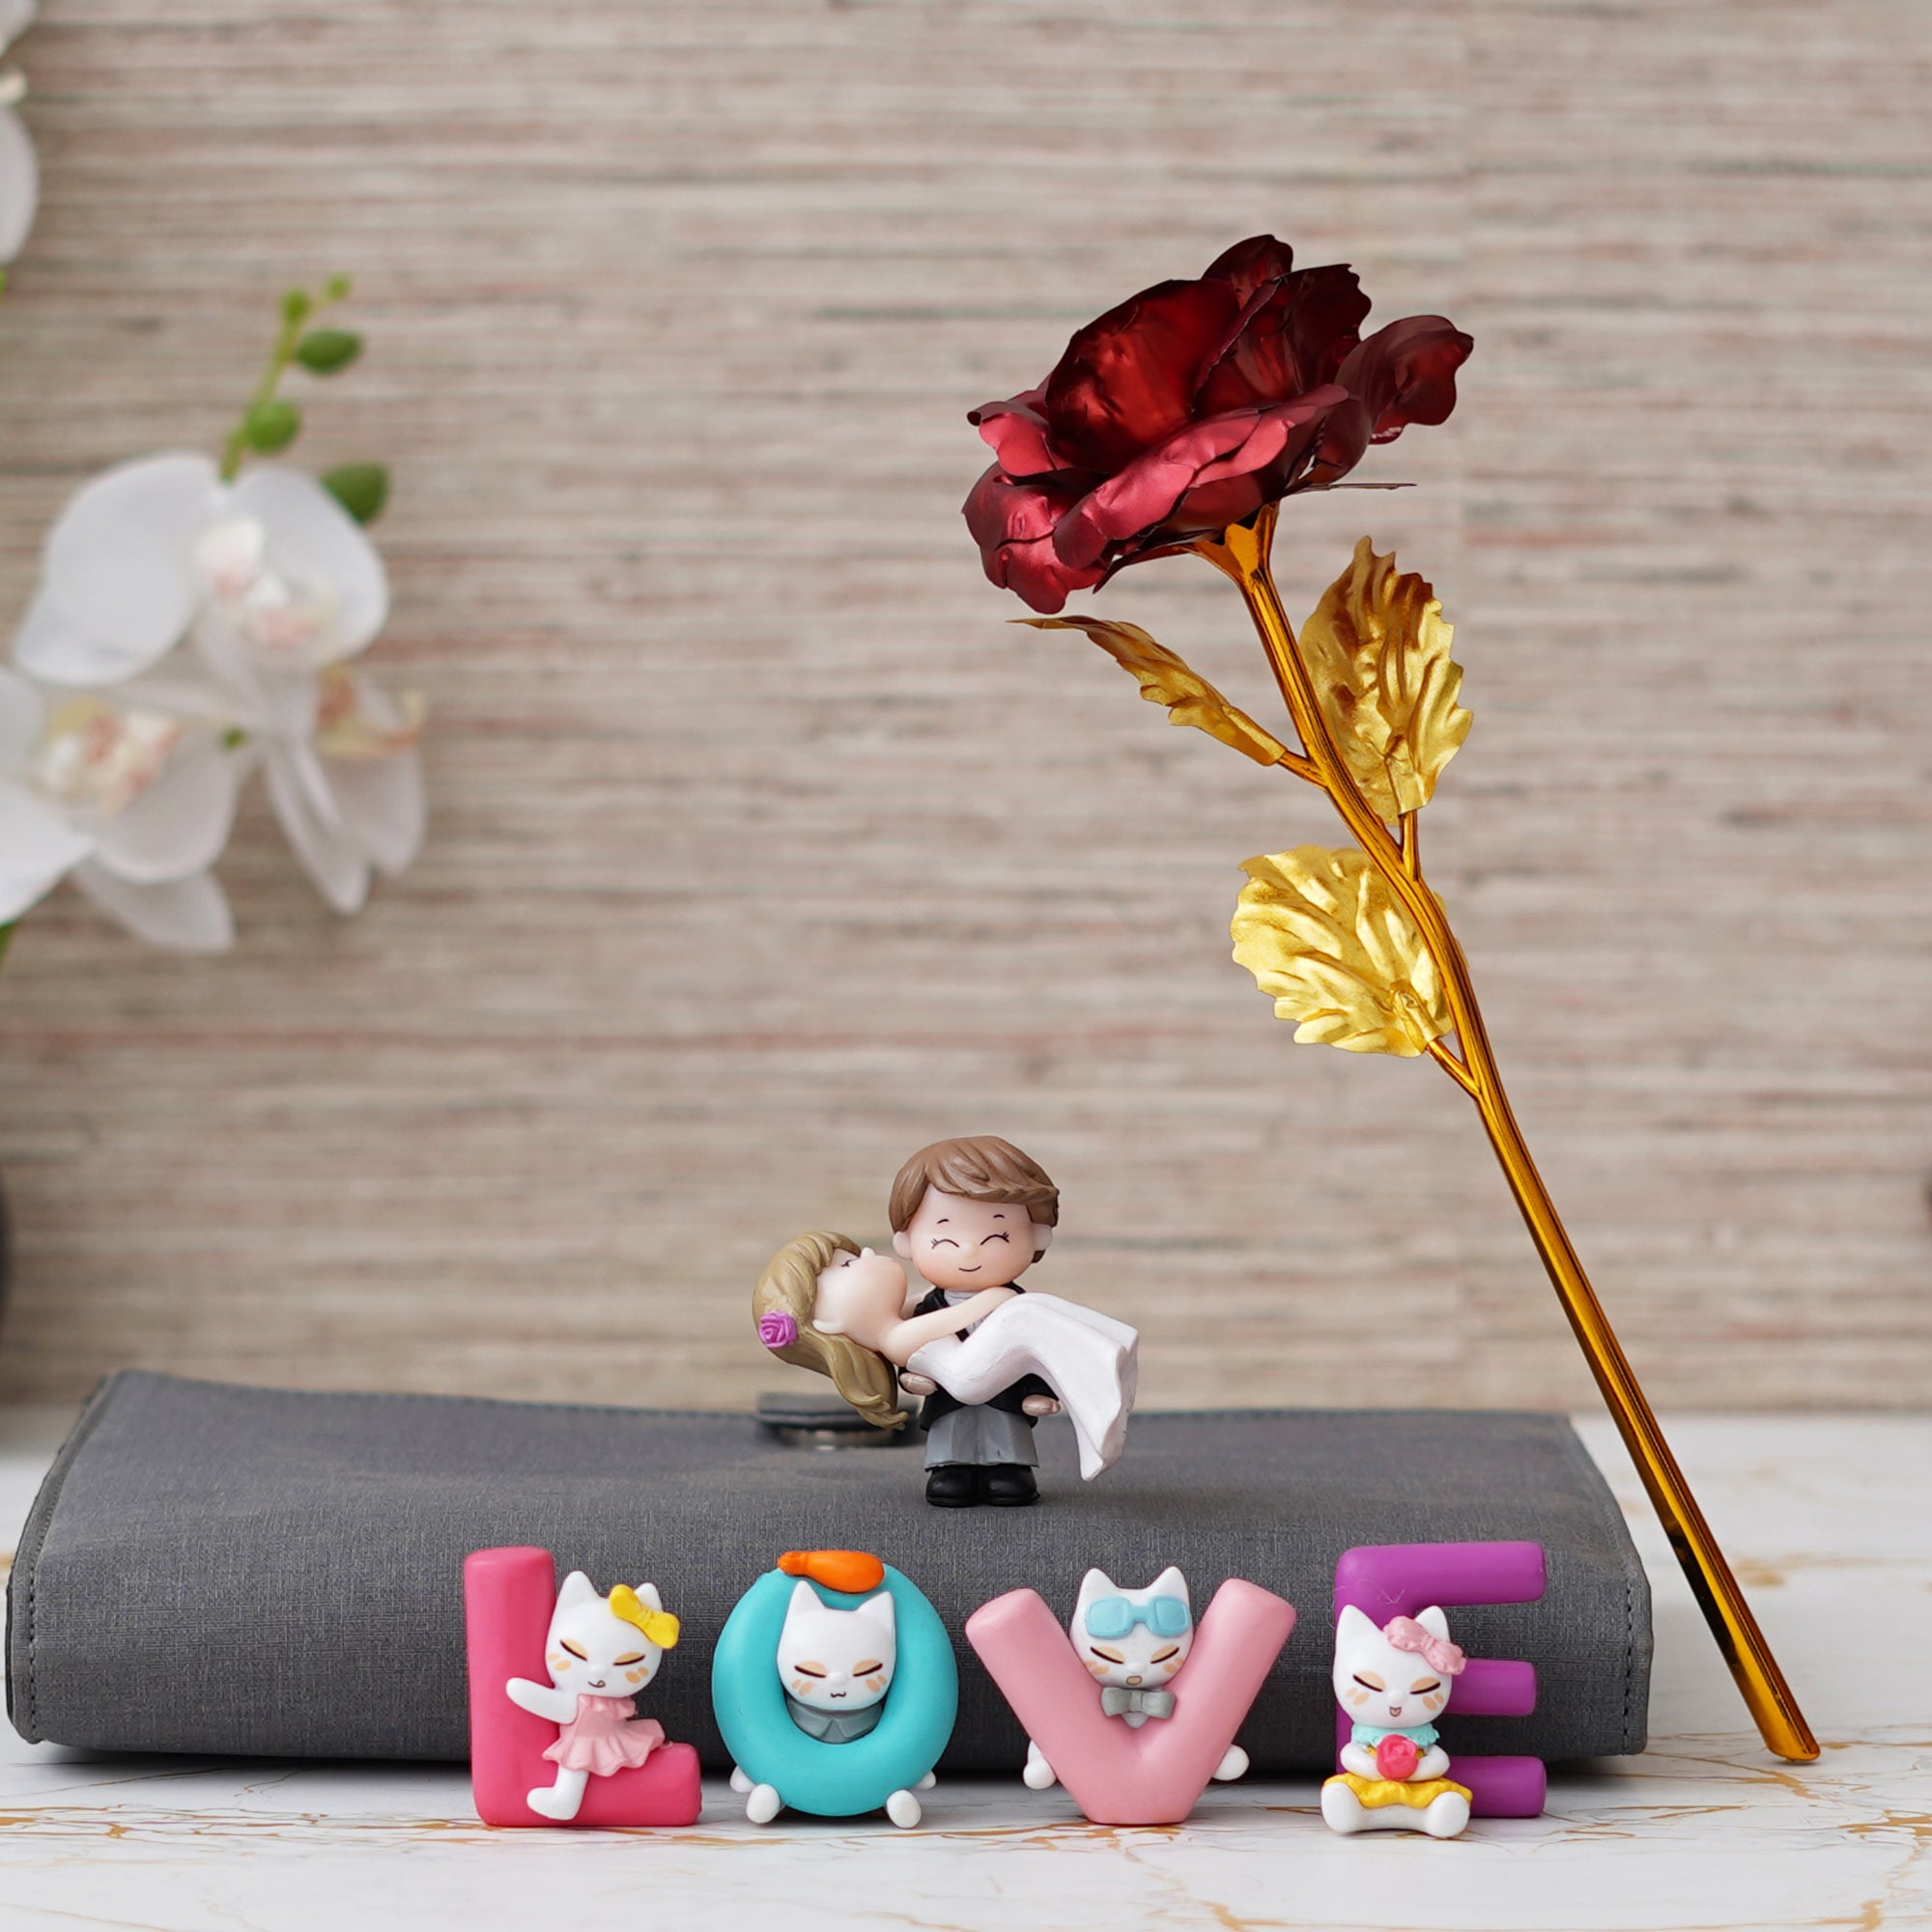 Valentine Combo of Golden Red Rose Gift Set, Bride Kissing Groom Romantic Polyresin Decorative Showpiece, "Love" Animated Characters Showpiece